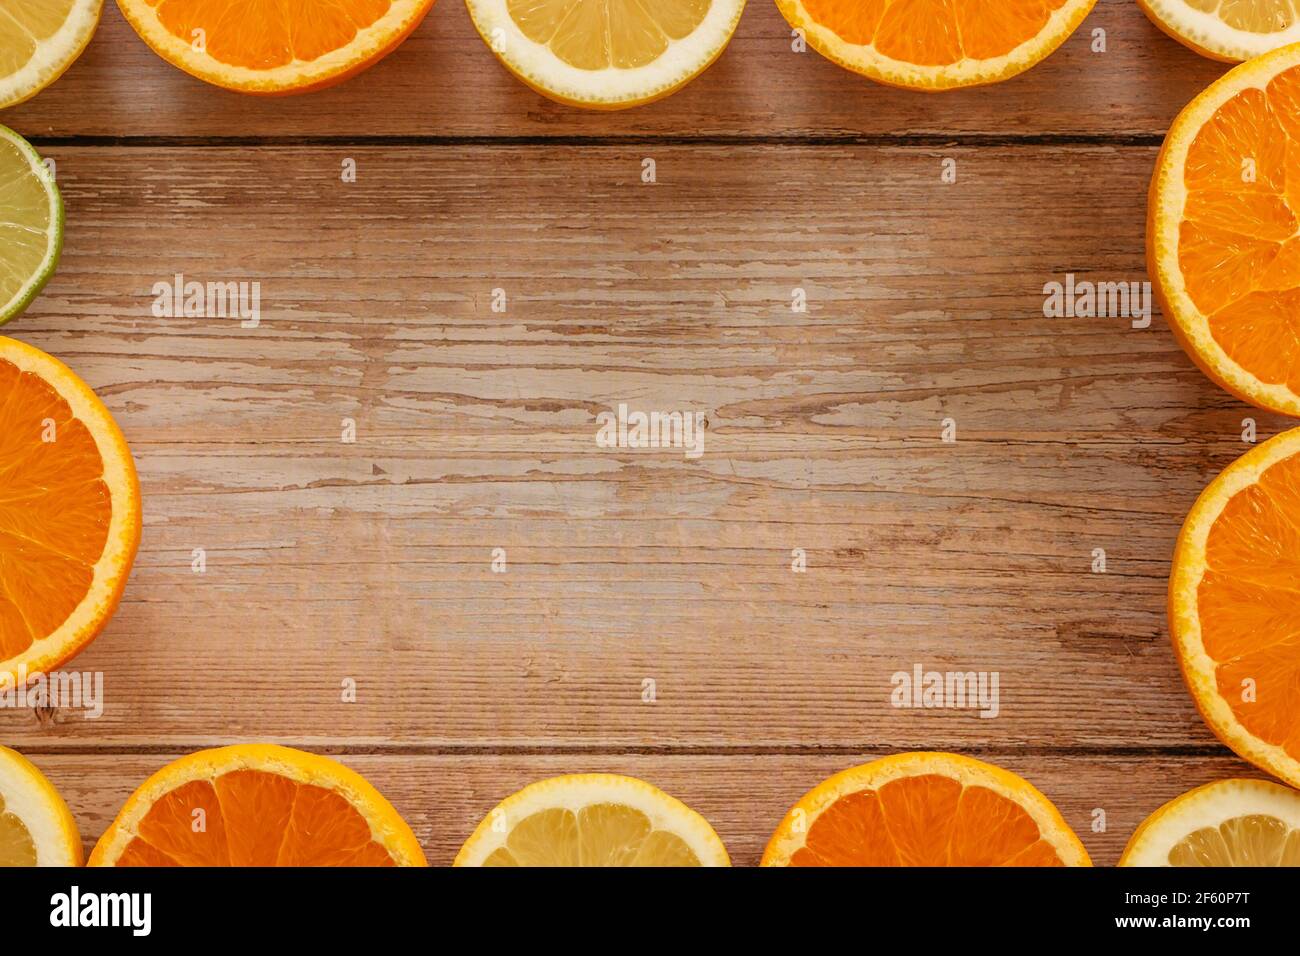 Oranges,limes and lemons slides on wooden table view from above.Beautiful background with fresh fruit half cut.Healthy eating vitamin C.Summer tropic Stock Photo